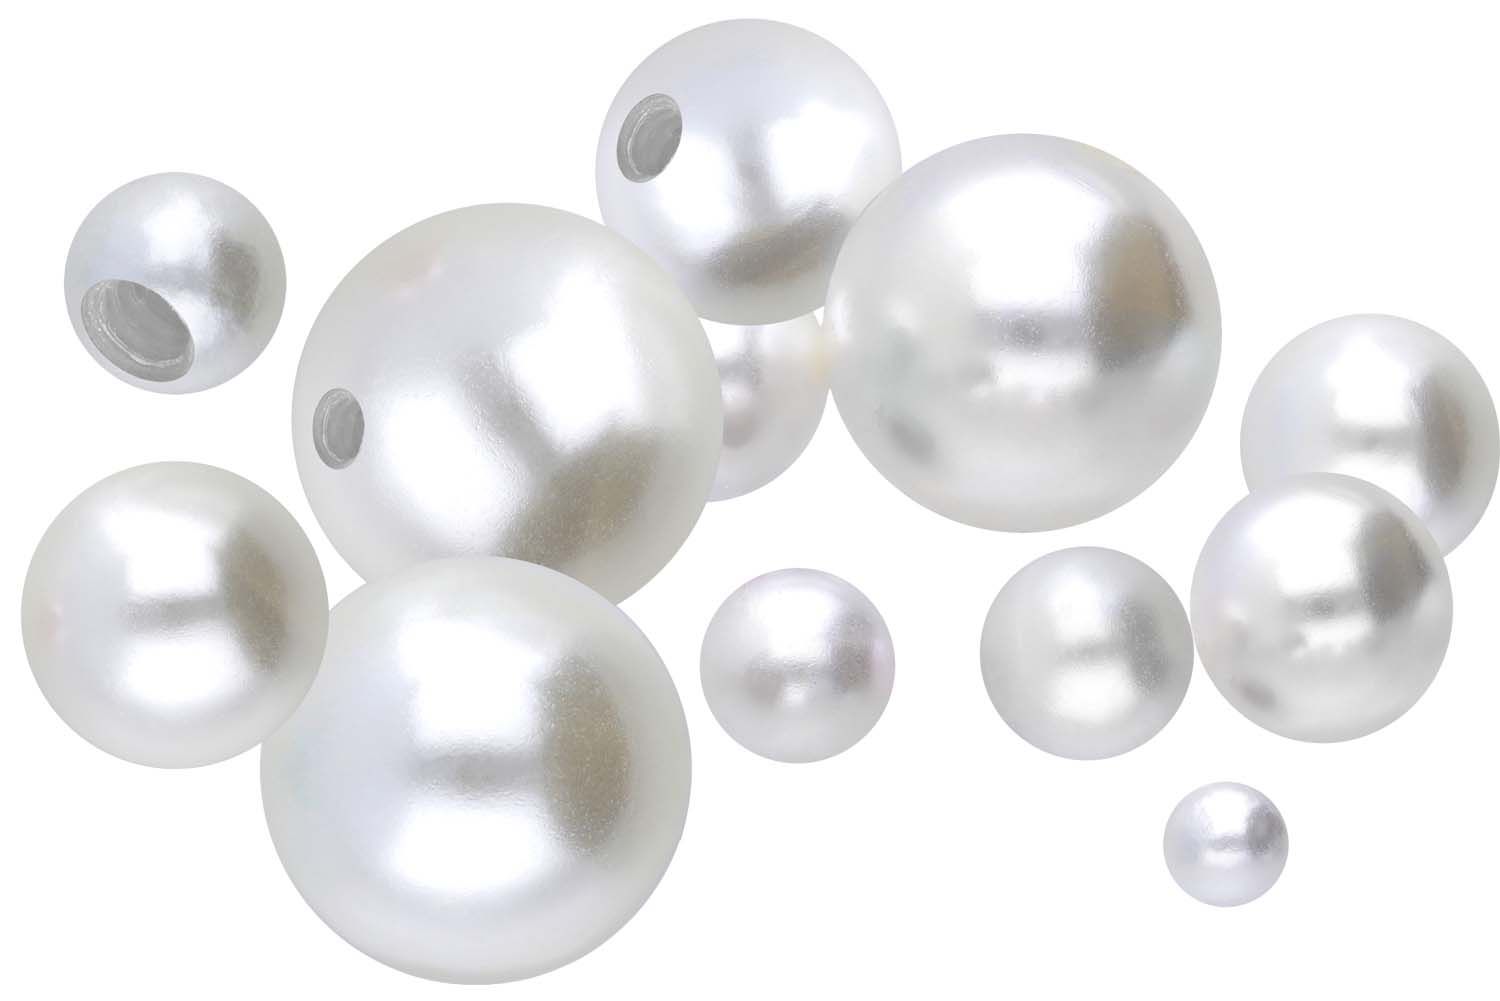 Synthetic screw-in pearl